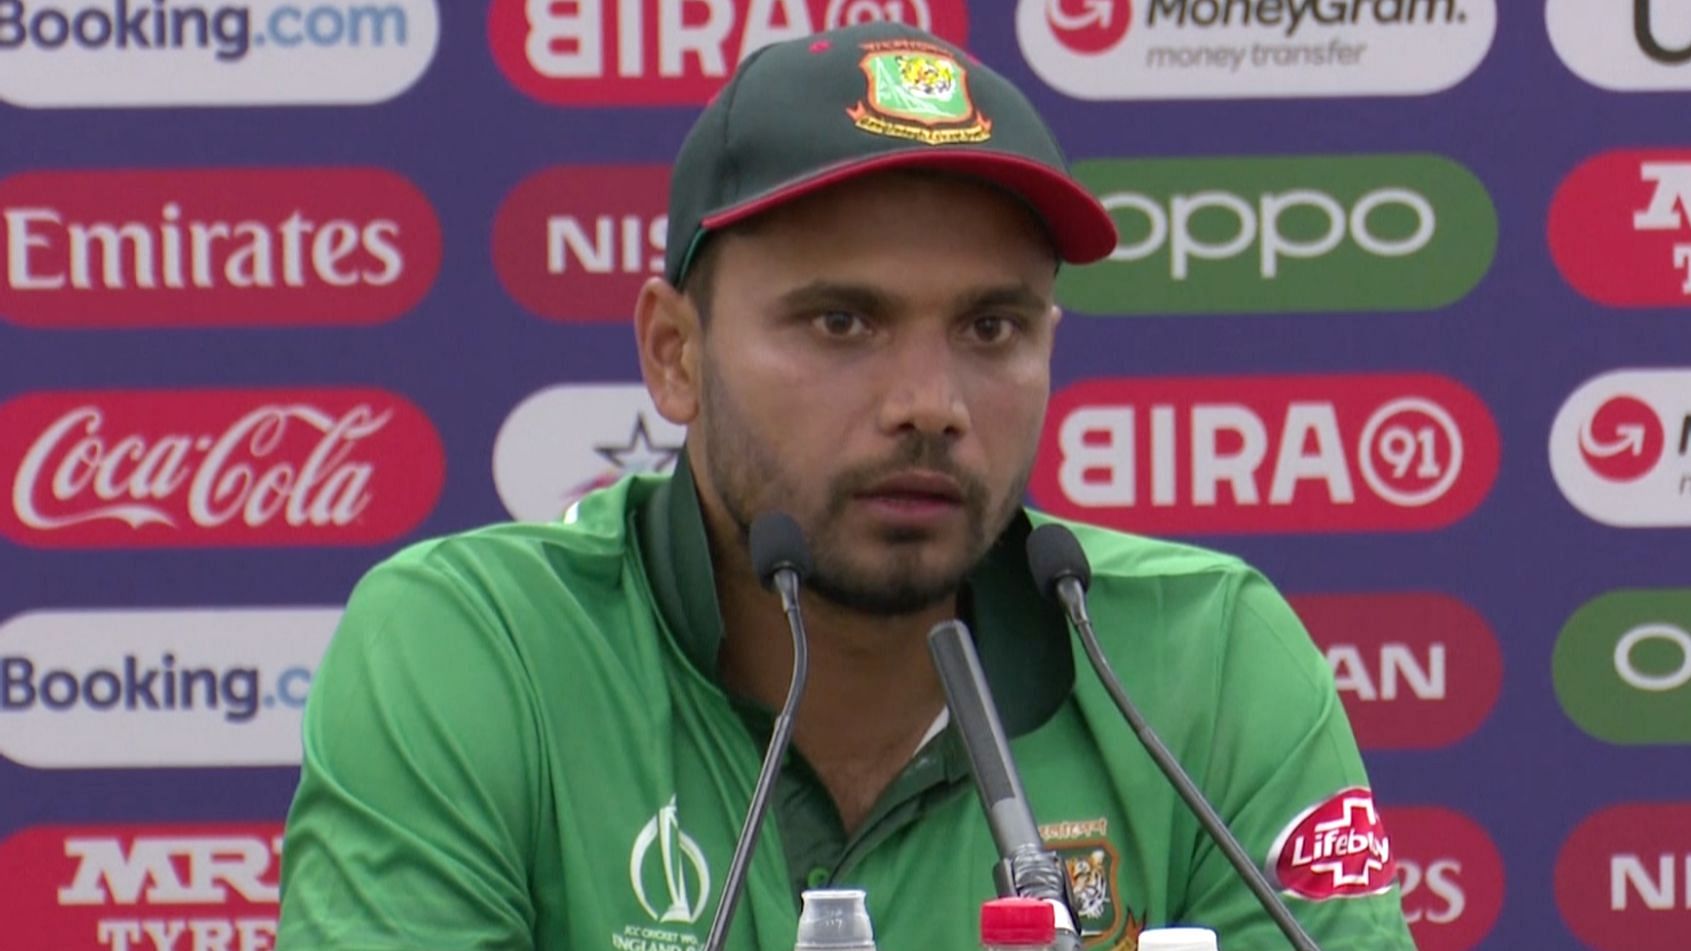 Bangladesh skipper Mashrafe Mortaza has said that the win against South Africa is one of their top wins.